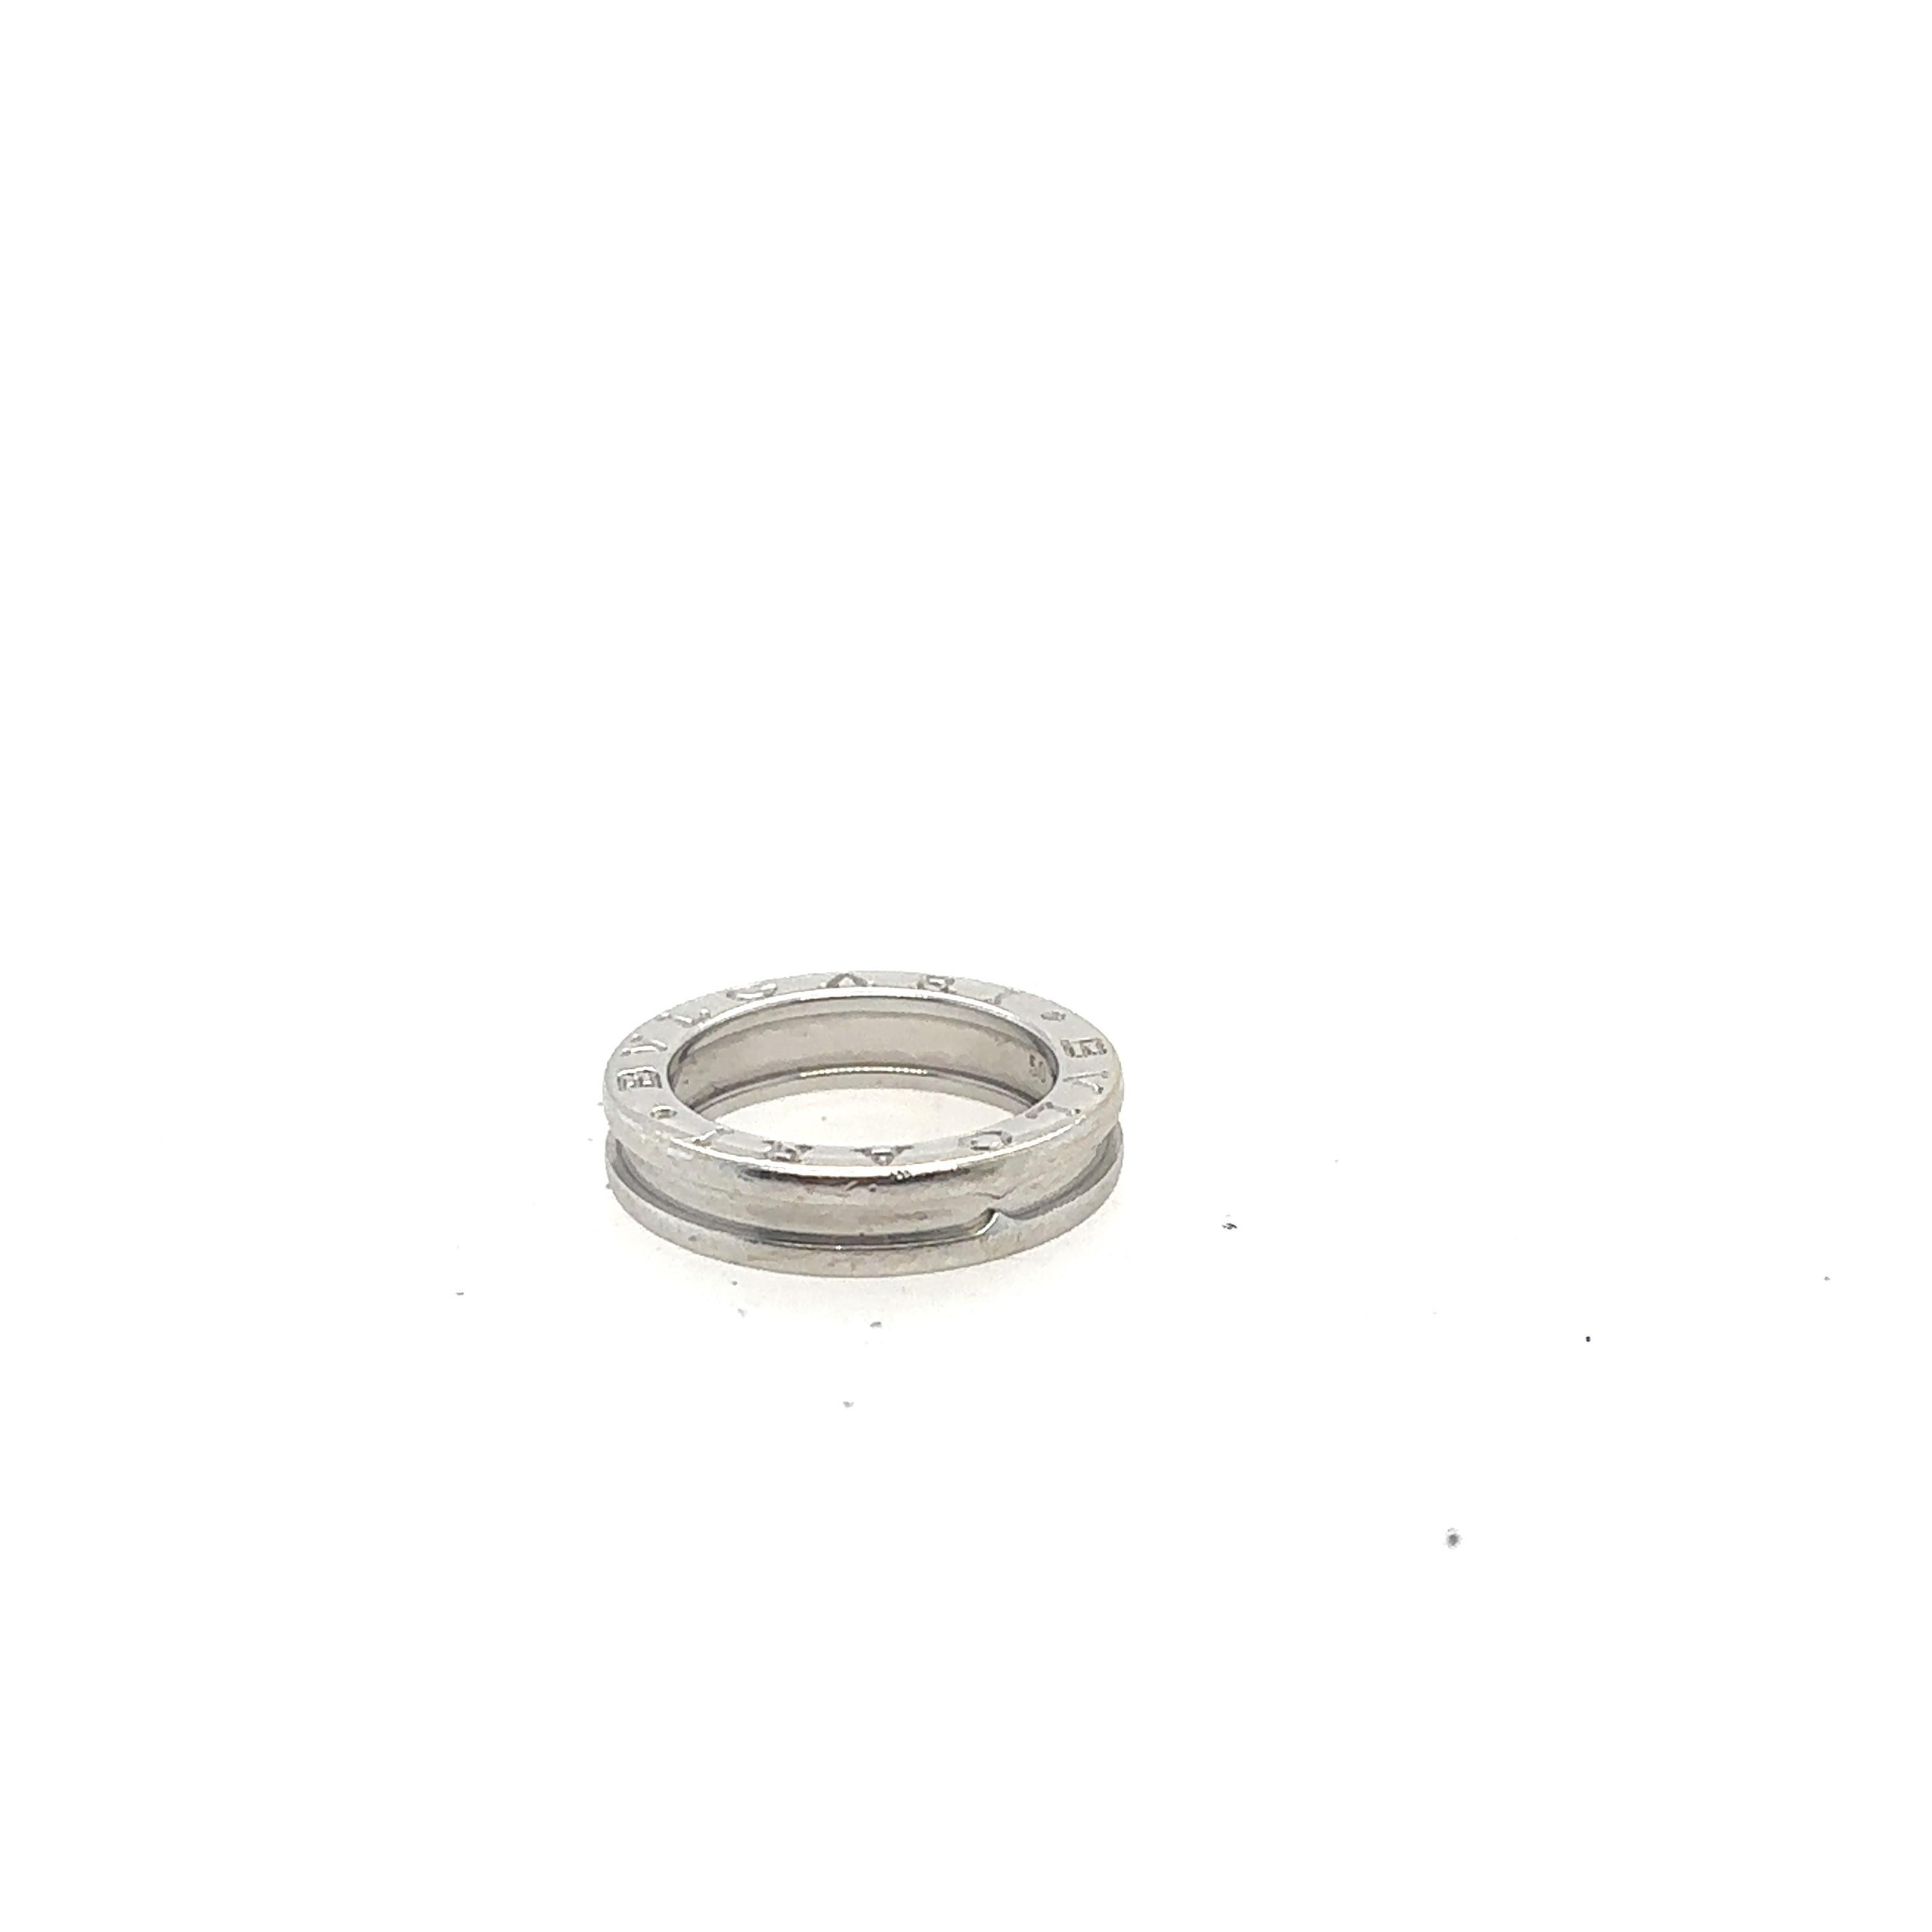 BVLGARI 18k White Gold B Zero Band Ring  In Excellent Condition For Sale In Vaughan, CA